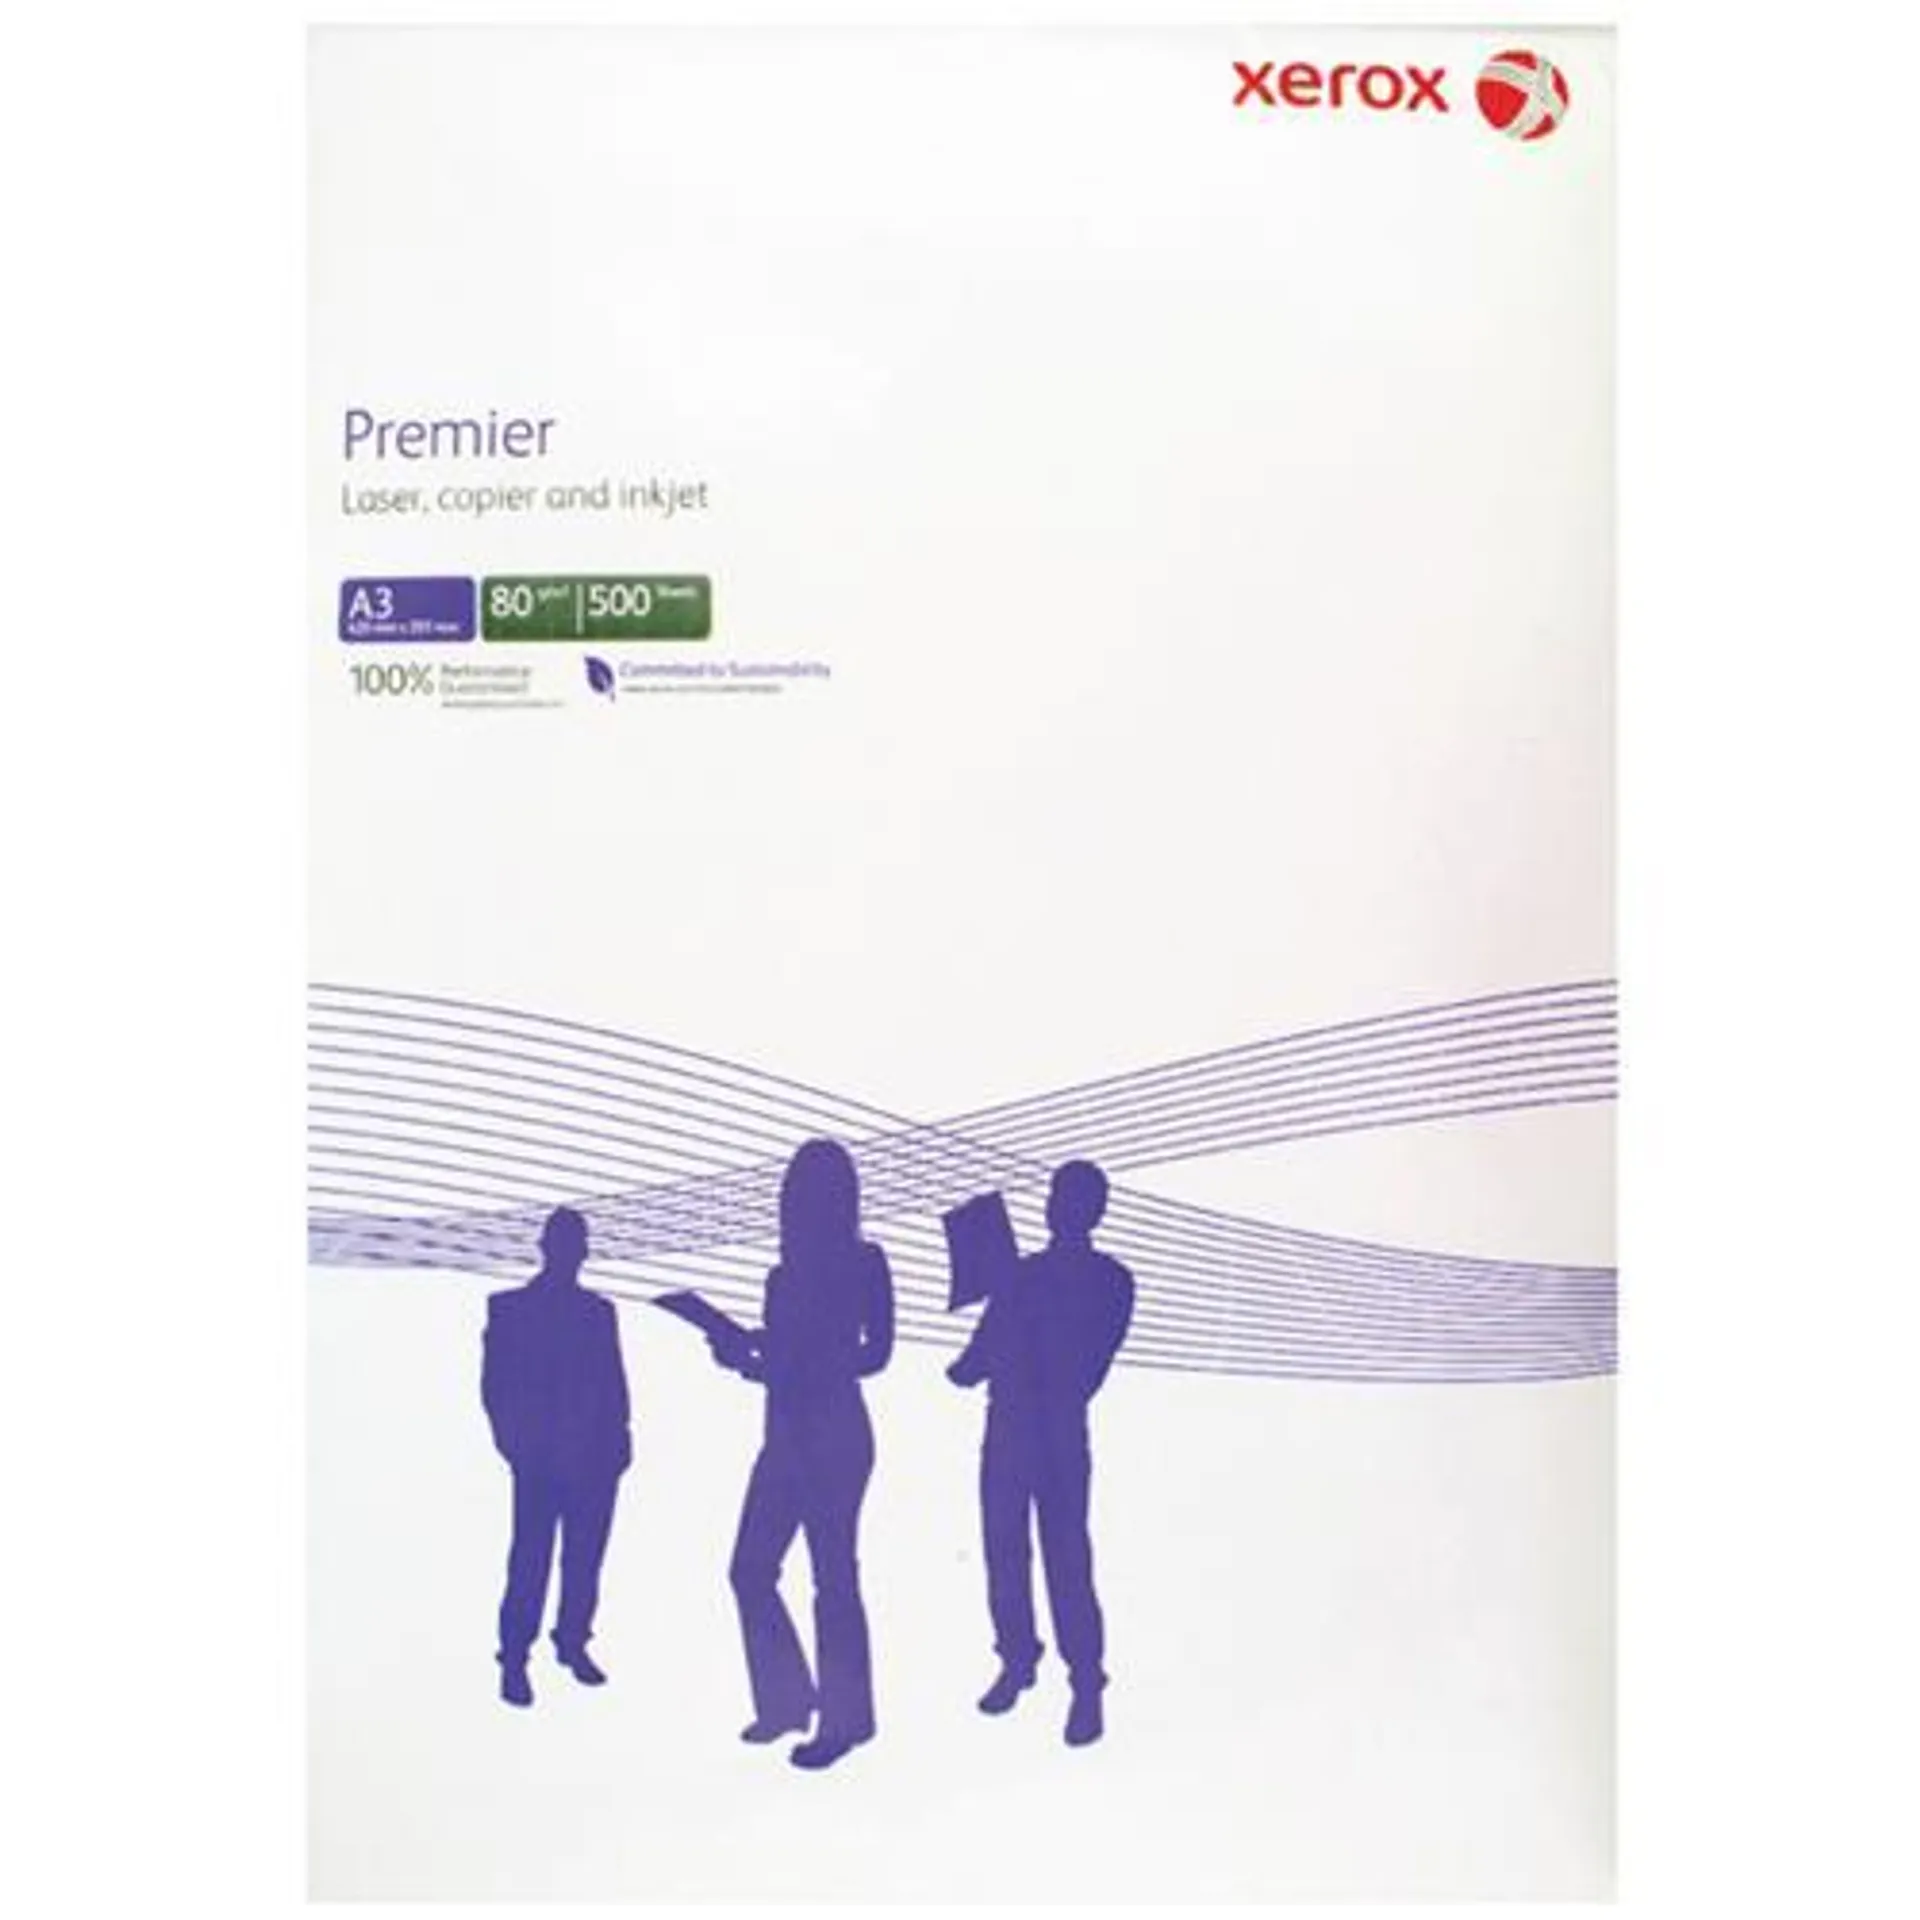 Xerox Premier A3 Paper 80gsm White Ream 003R91721 (Pack of 500)